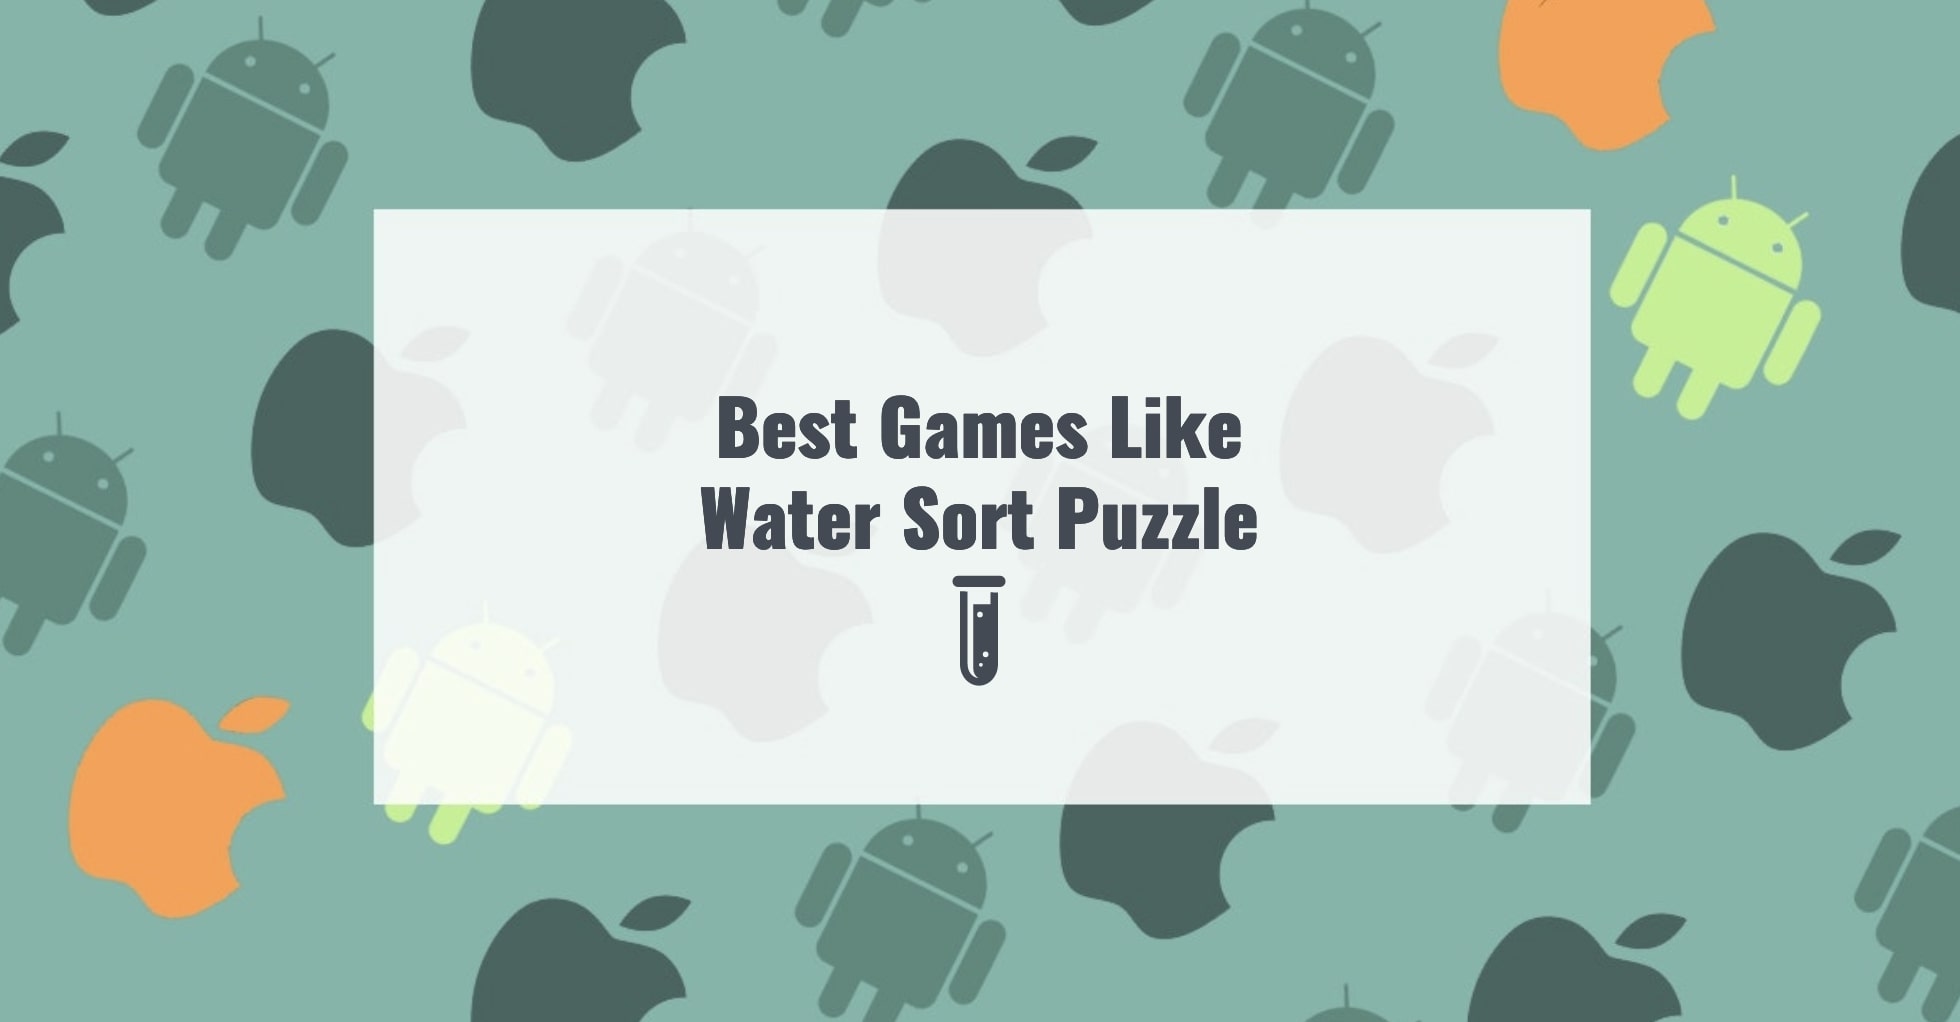 Best Games Like Water Sort Puzzle